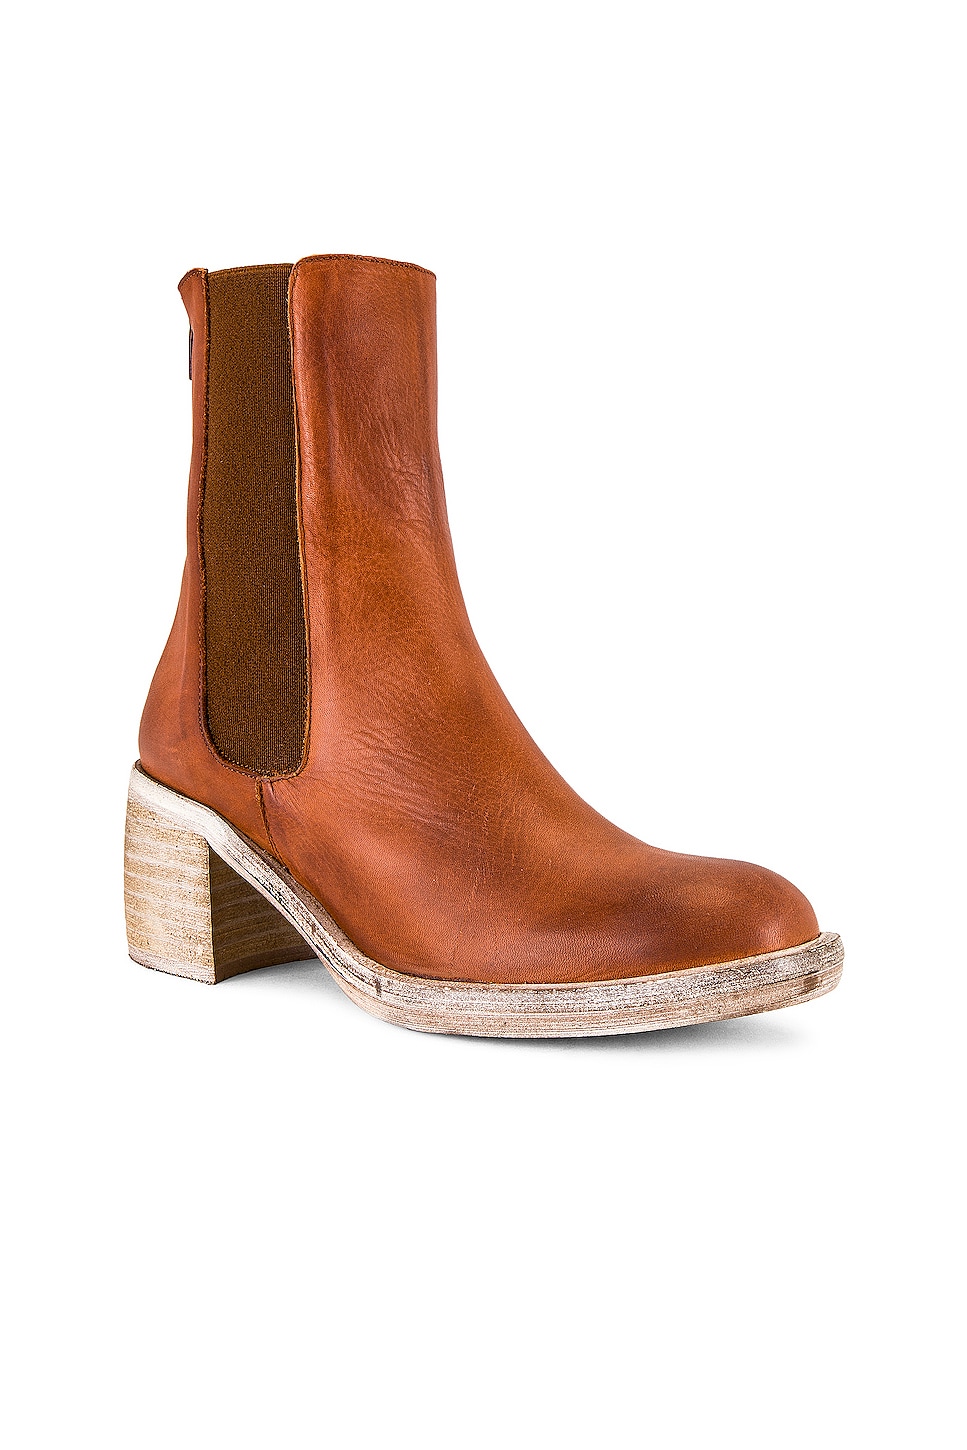 Free People Essential Chelsea Boot in Whiskey | REVOLVE